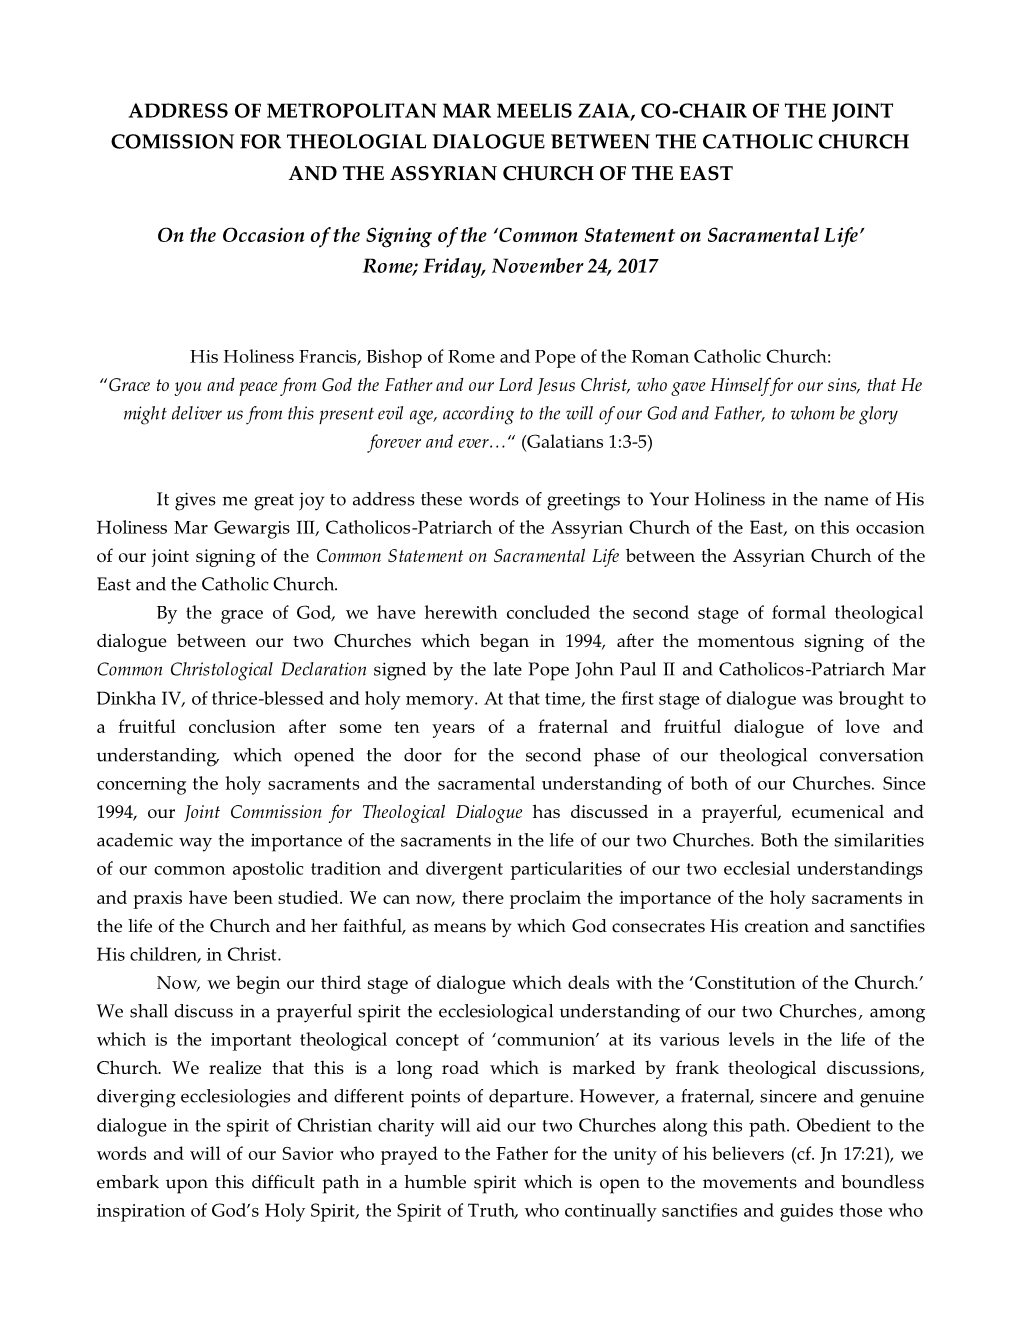 Address of Metropolitan Mar Meelis Zaia, Co-Chair of the Joint Comission for Theologial Dialogue Between the Catholic Church and the Assyrian Church of the East